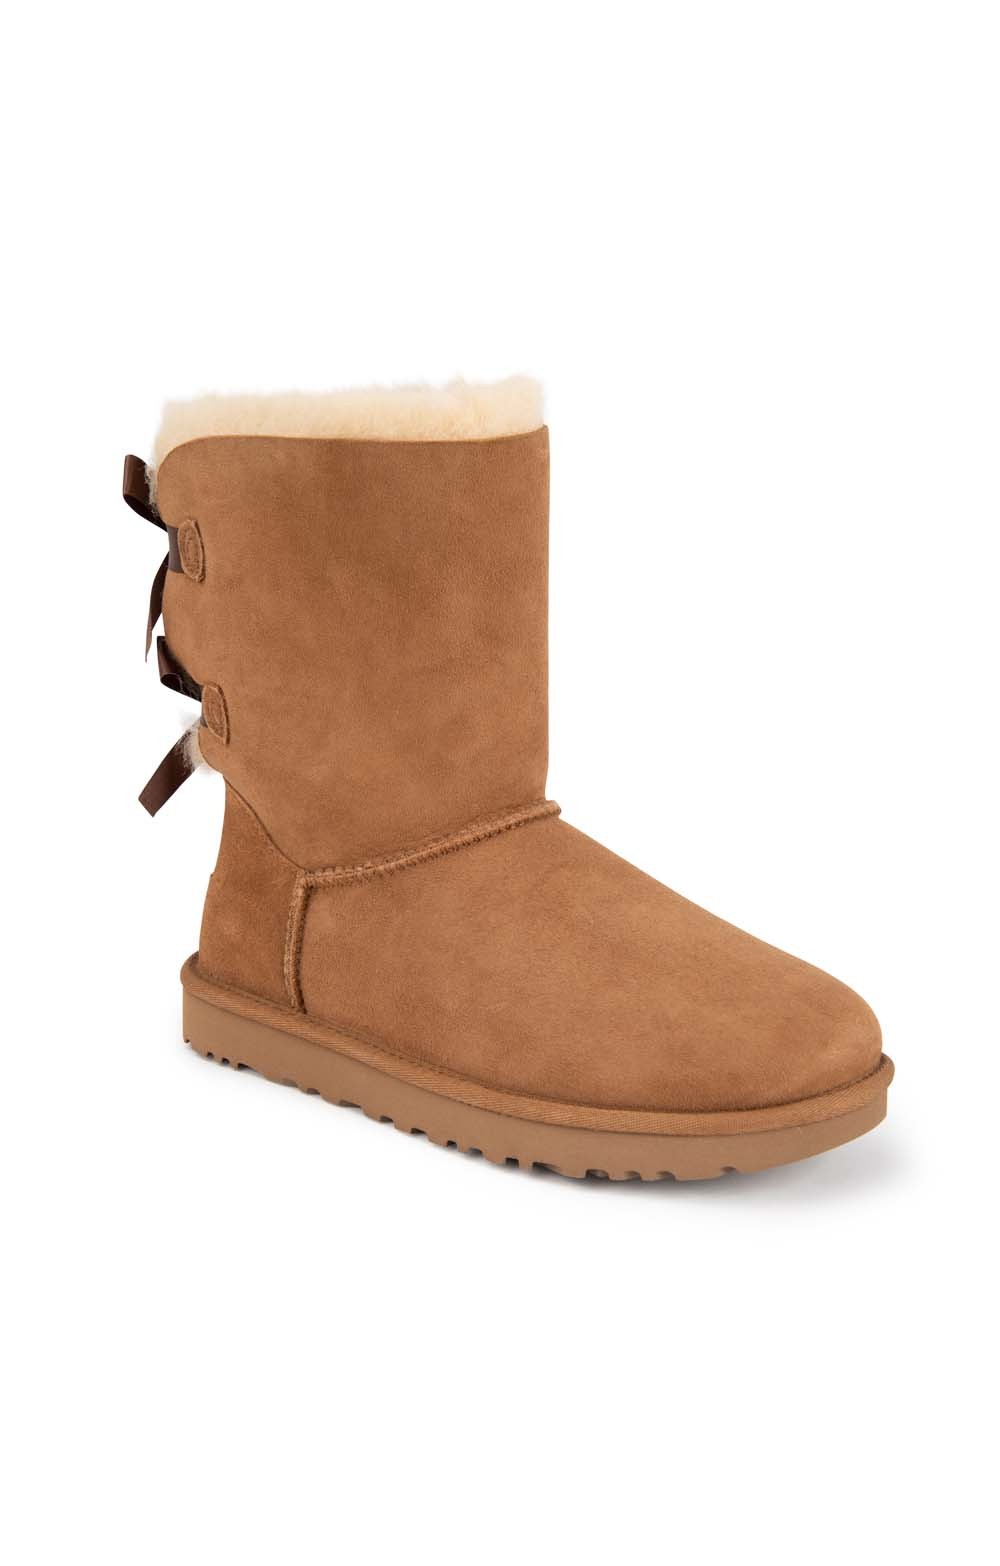 ladies bailey bow ugg boots